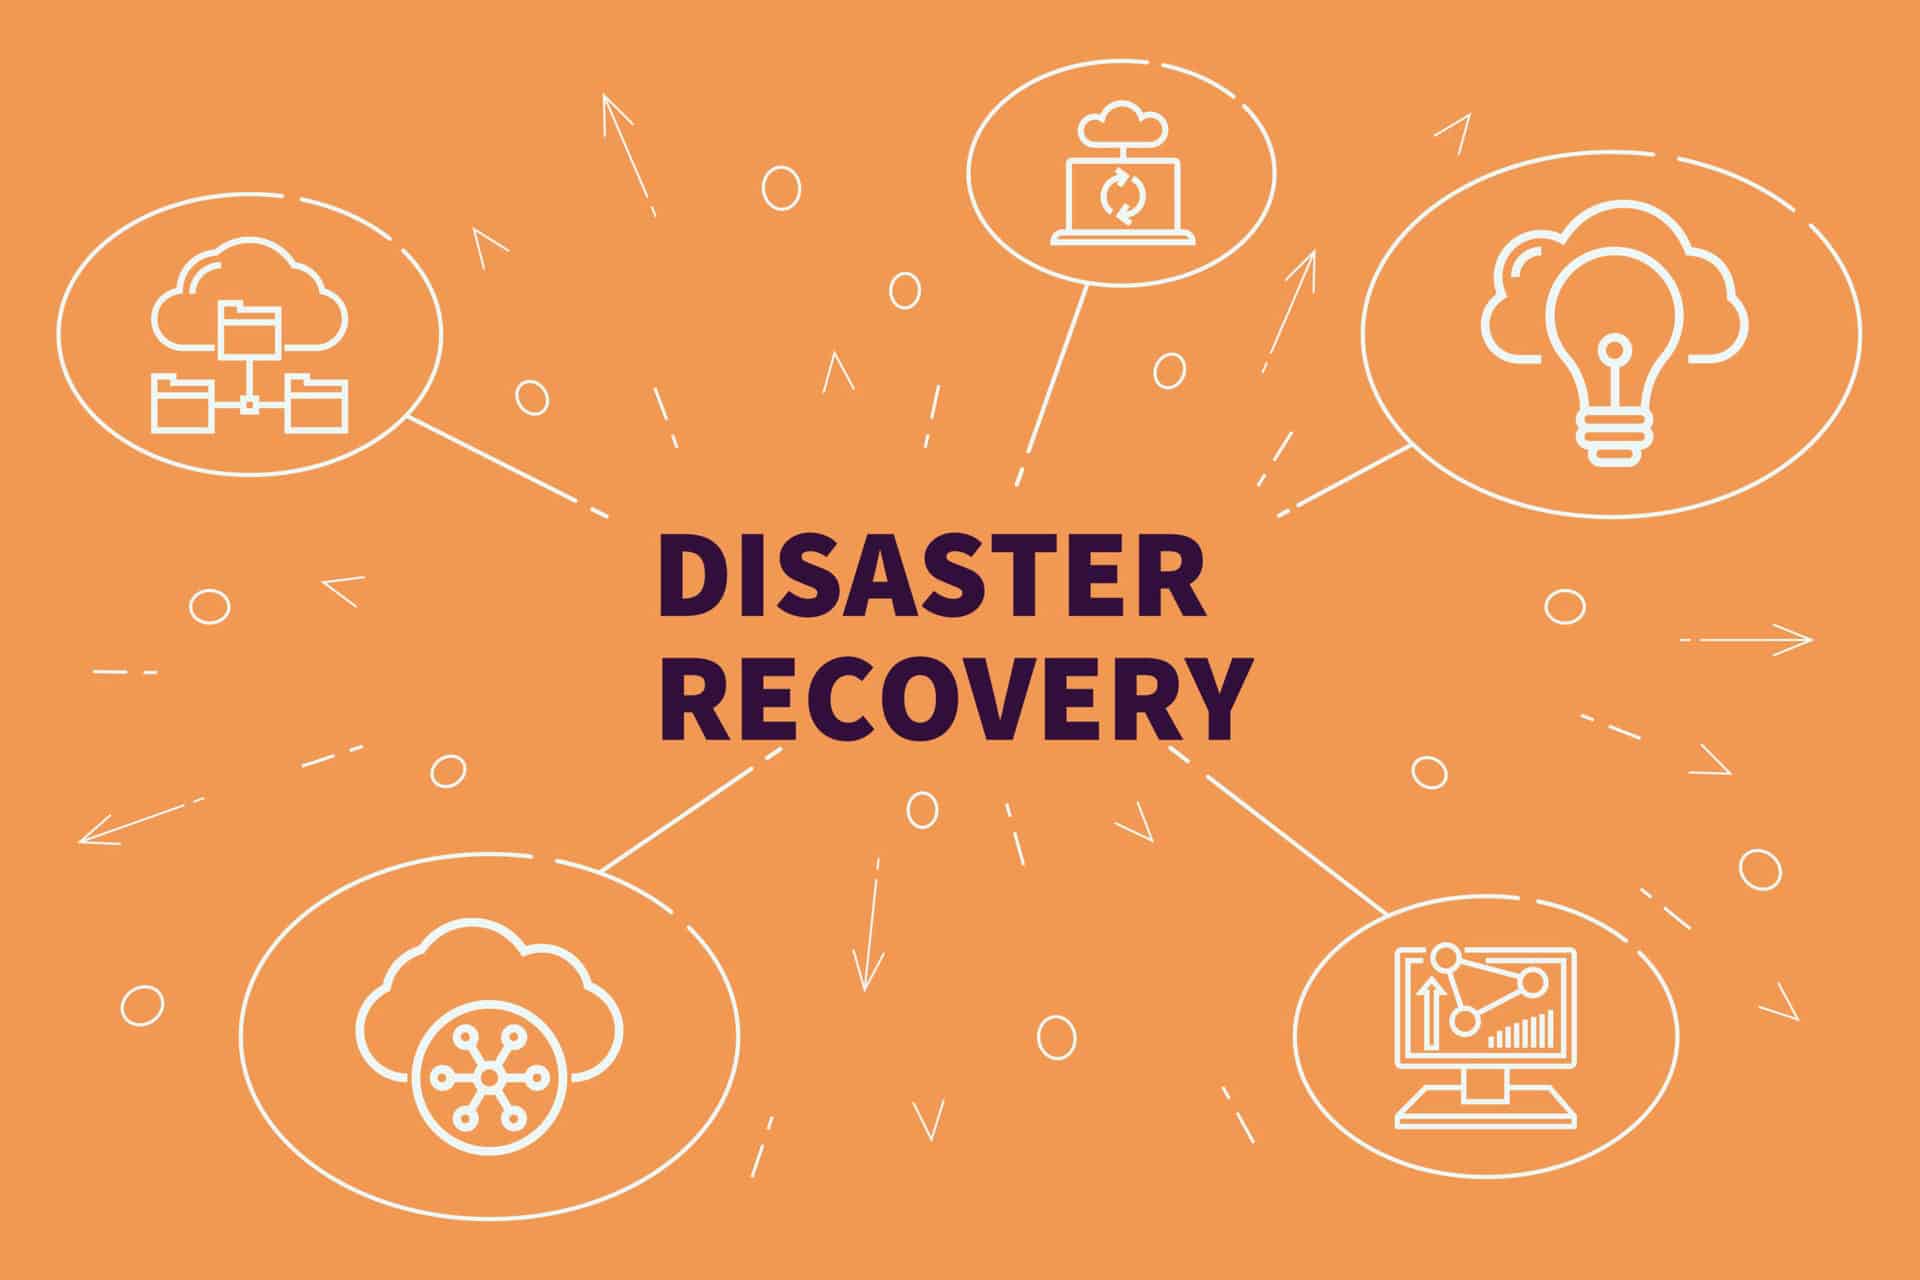 Disaster recovery and business continuity plans